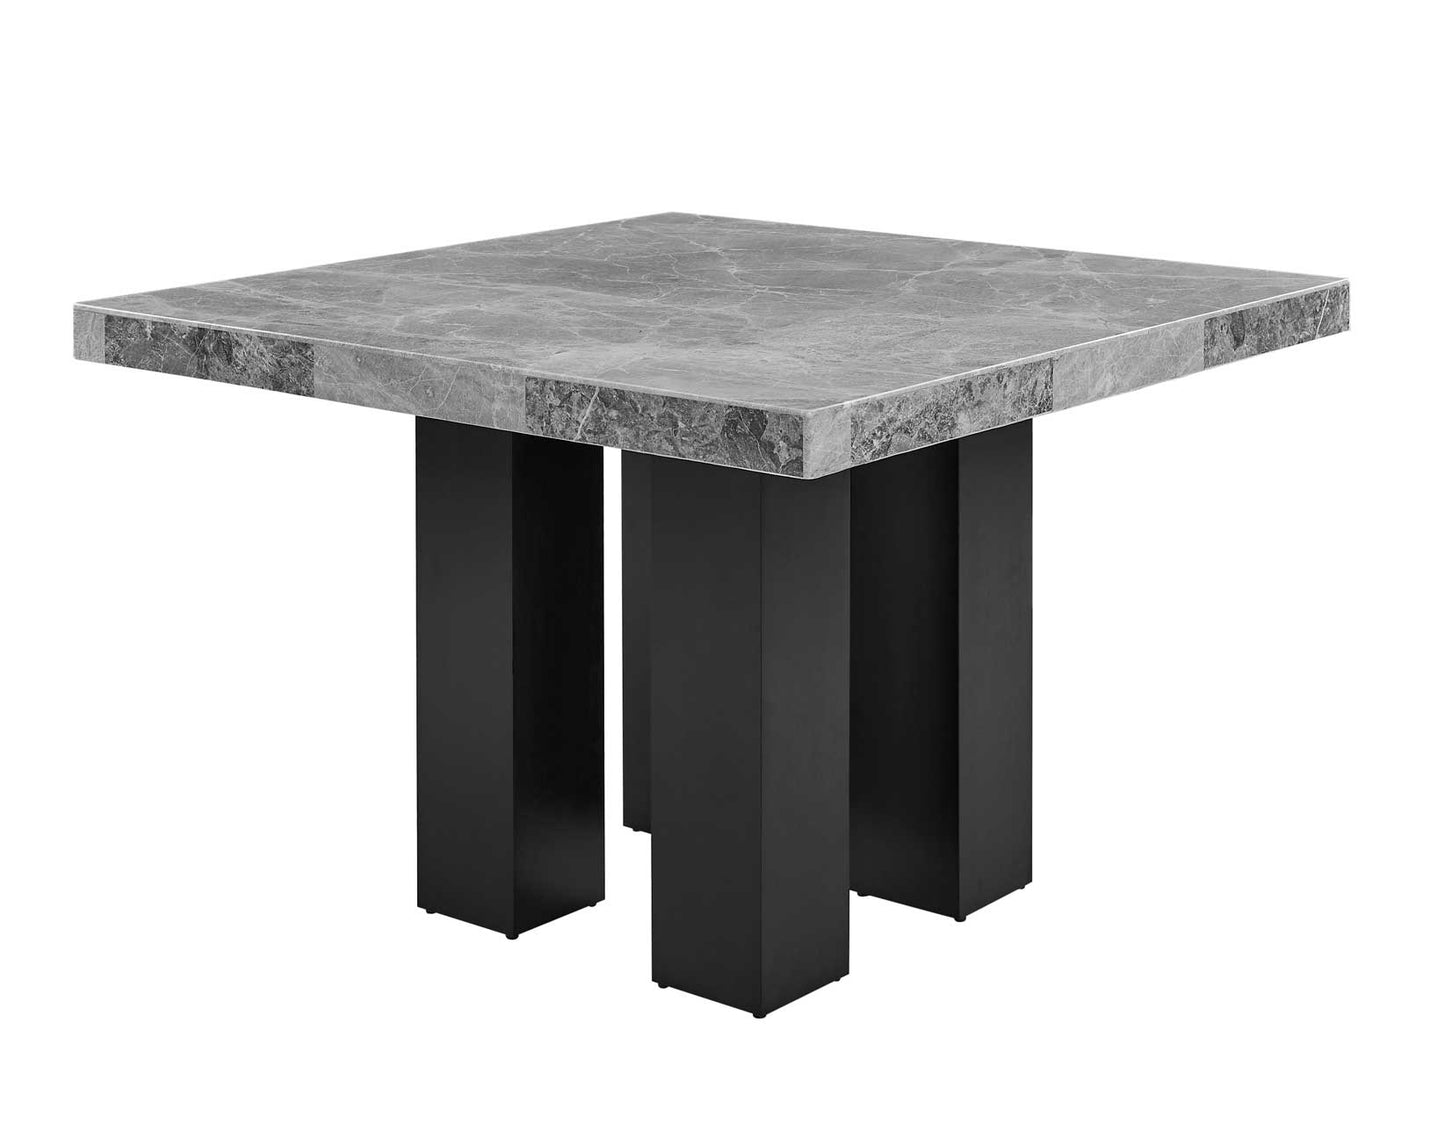 Camila Gray Marble 7-Piece Counter Dining Group
(Counter Table & 6 Counter Chairs)